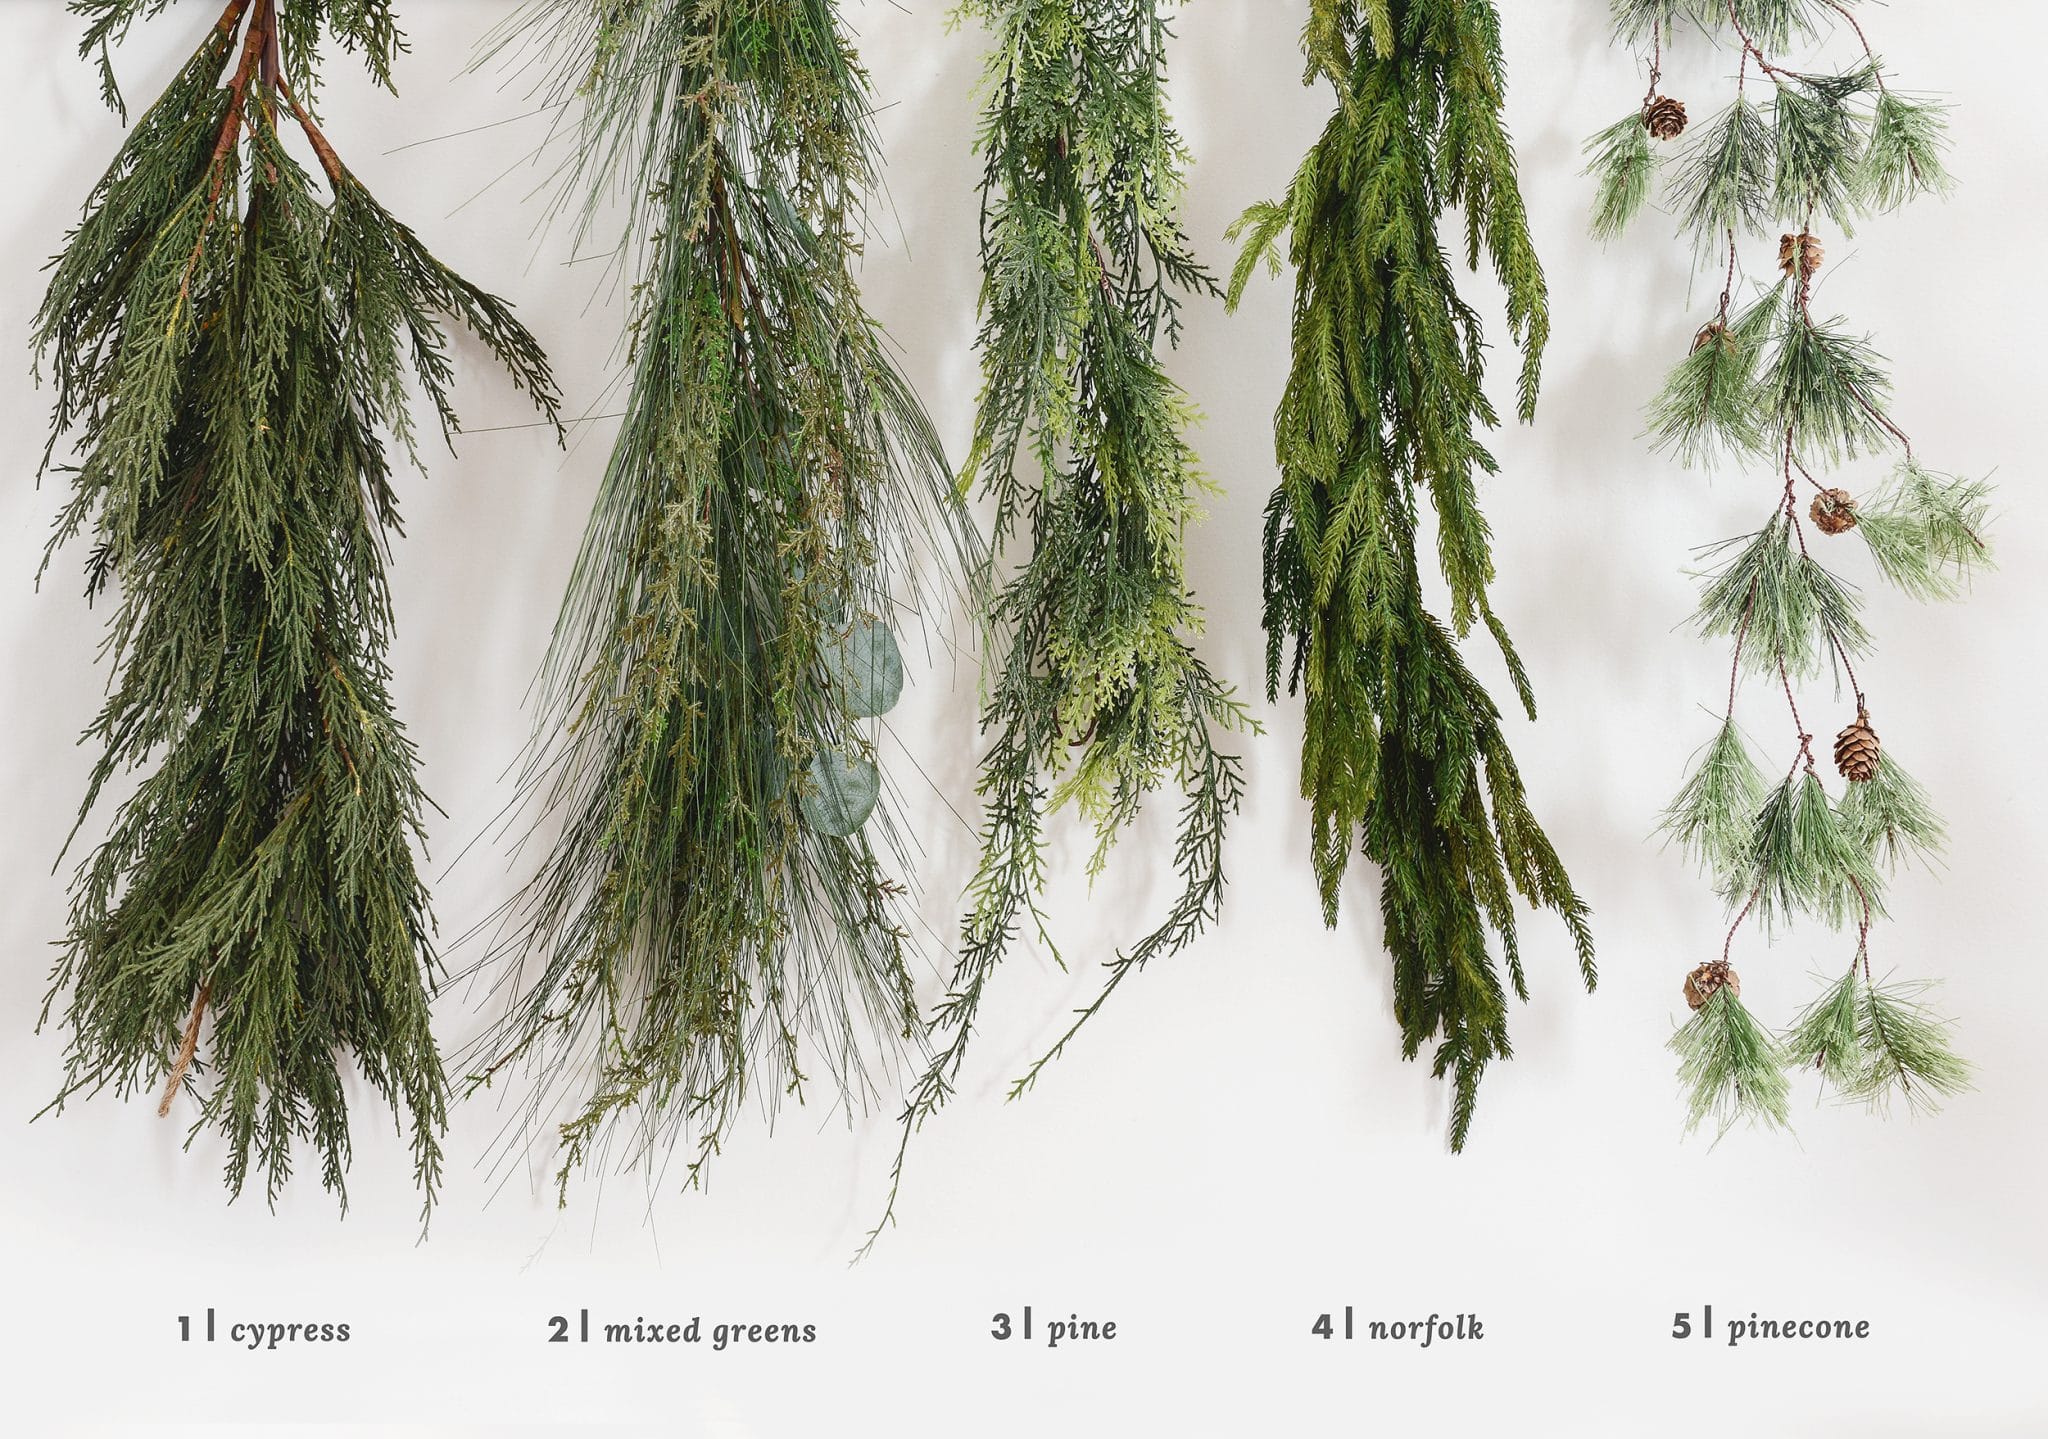 5 strands of garland | Which flocking spray is best? | How to flock your own holiday garland, tree and decor, via Yellow Brick Home